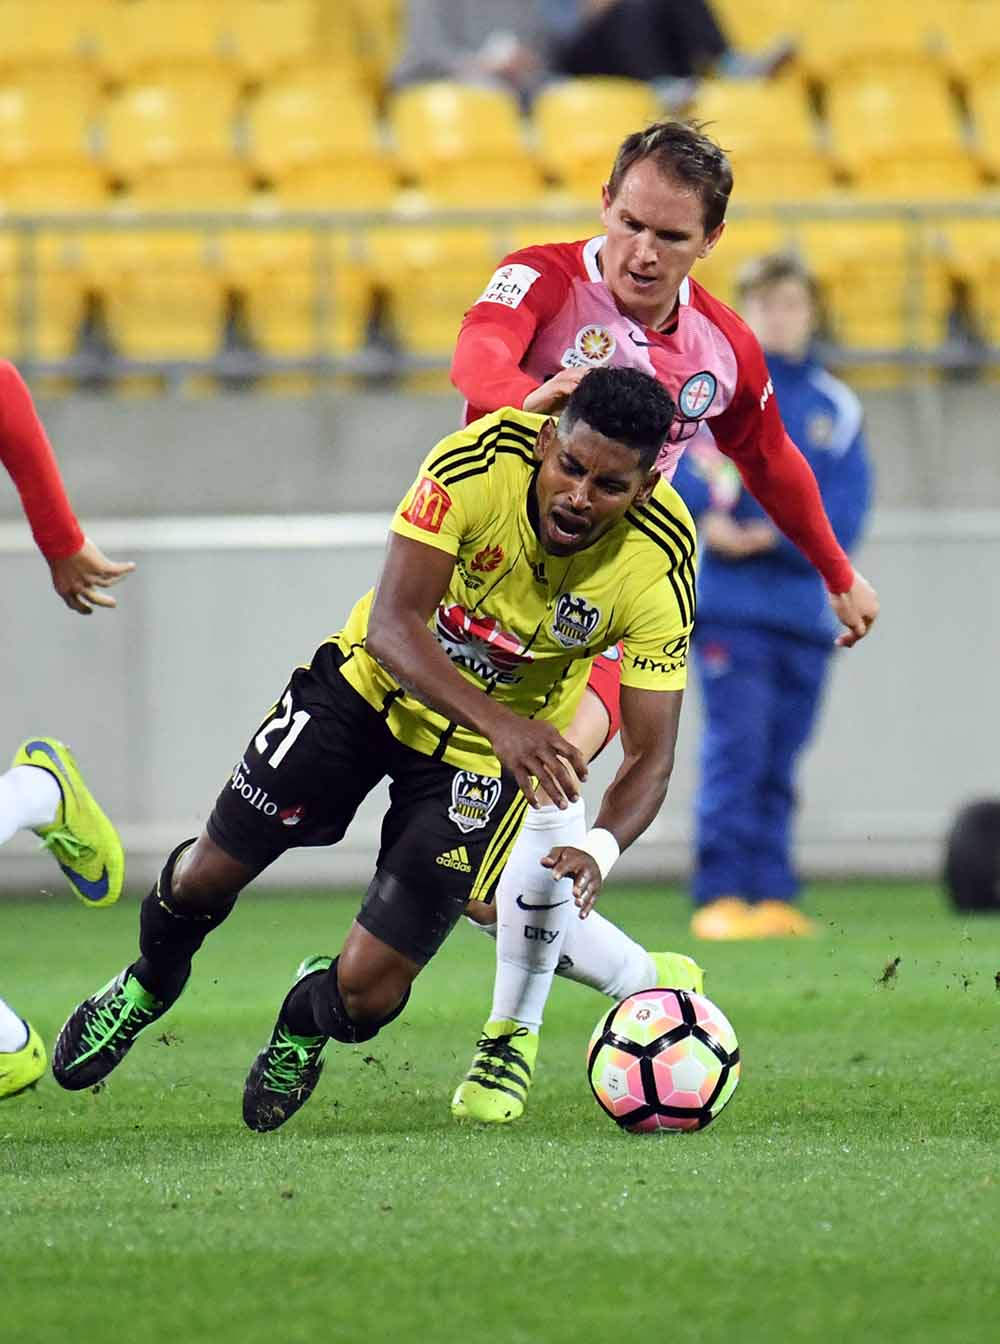 Roy Krishna of the Phoenix (left) is tackled by Neil Kilkenny of Melbourne during the Round 1 A-League match between the Wellington Phoenix and Melbourne City at Westpac Stadium in Wellington, New Zealand, Saturday, Oct. 8, 2016. (AAP Image/SNPA, Ross Setford)